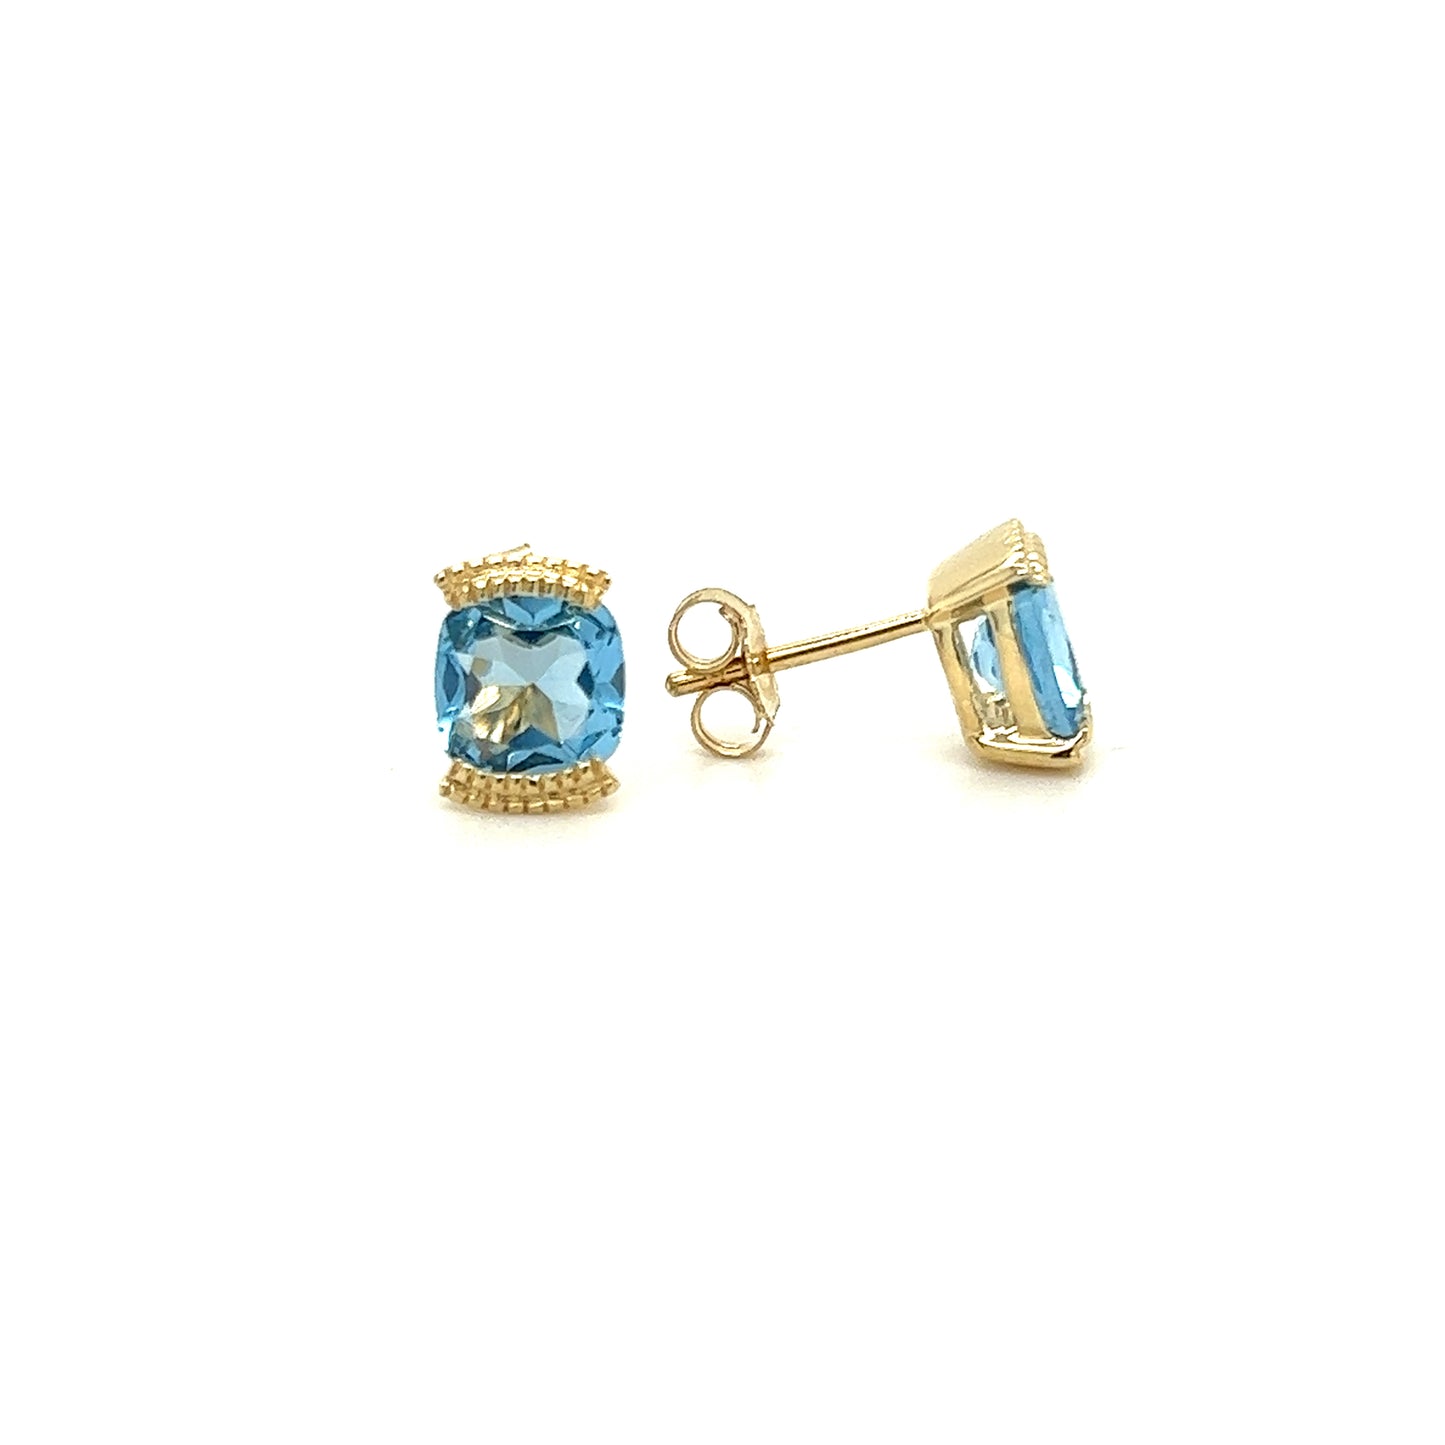 Cushion Blue Topaz Stud Earrings with 1.78ctw of Swiss Blue Topaz in 14K Yellow Gold Front and Side View